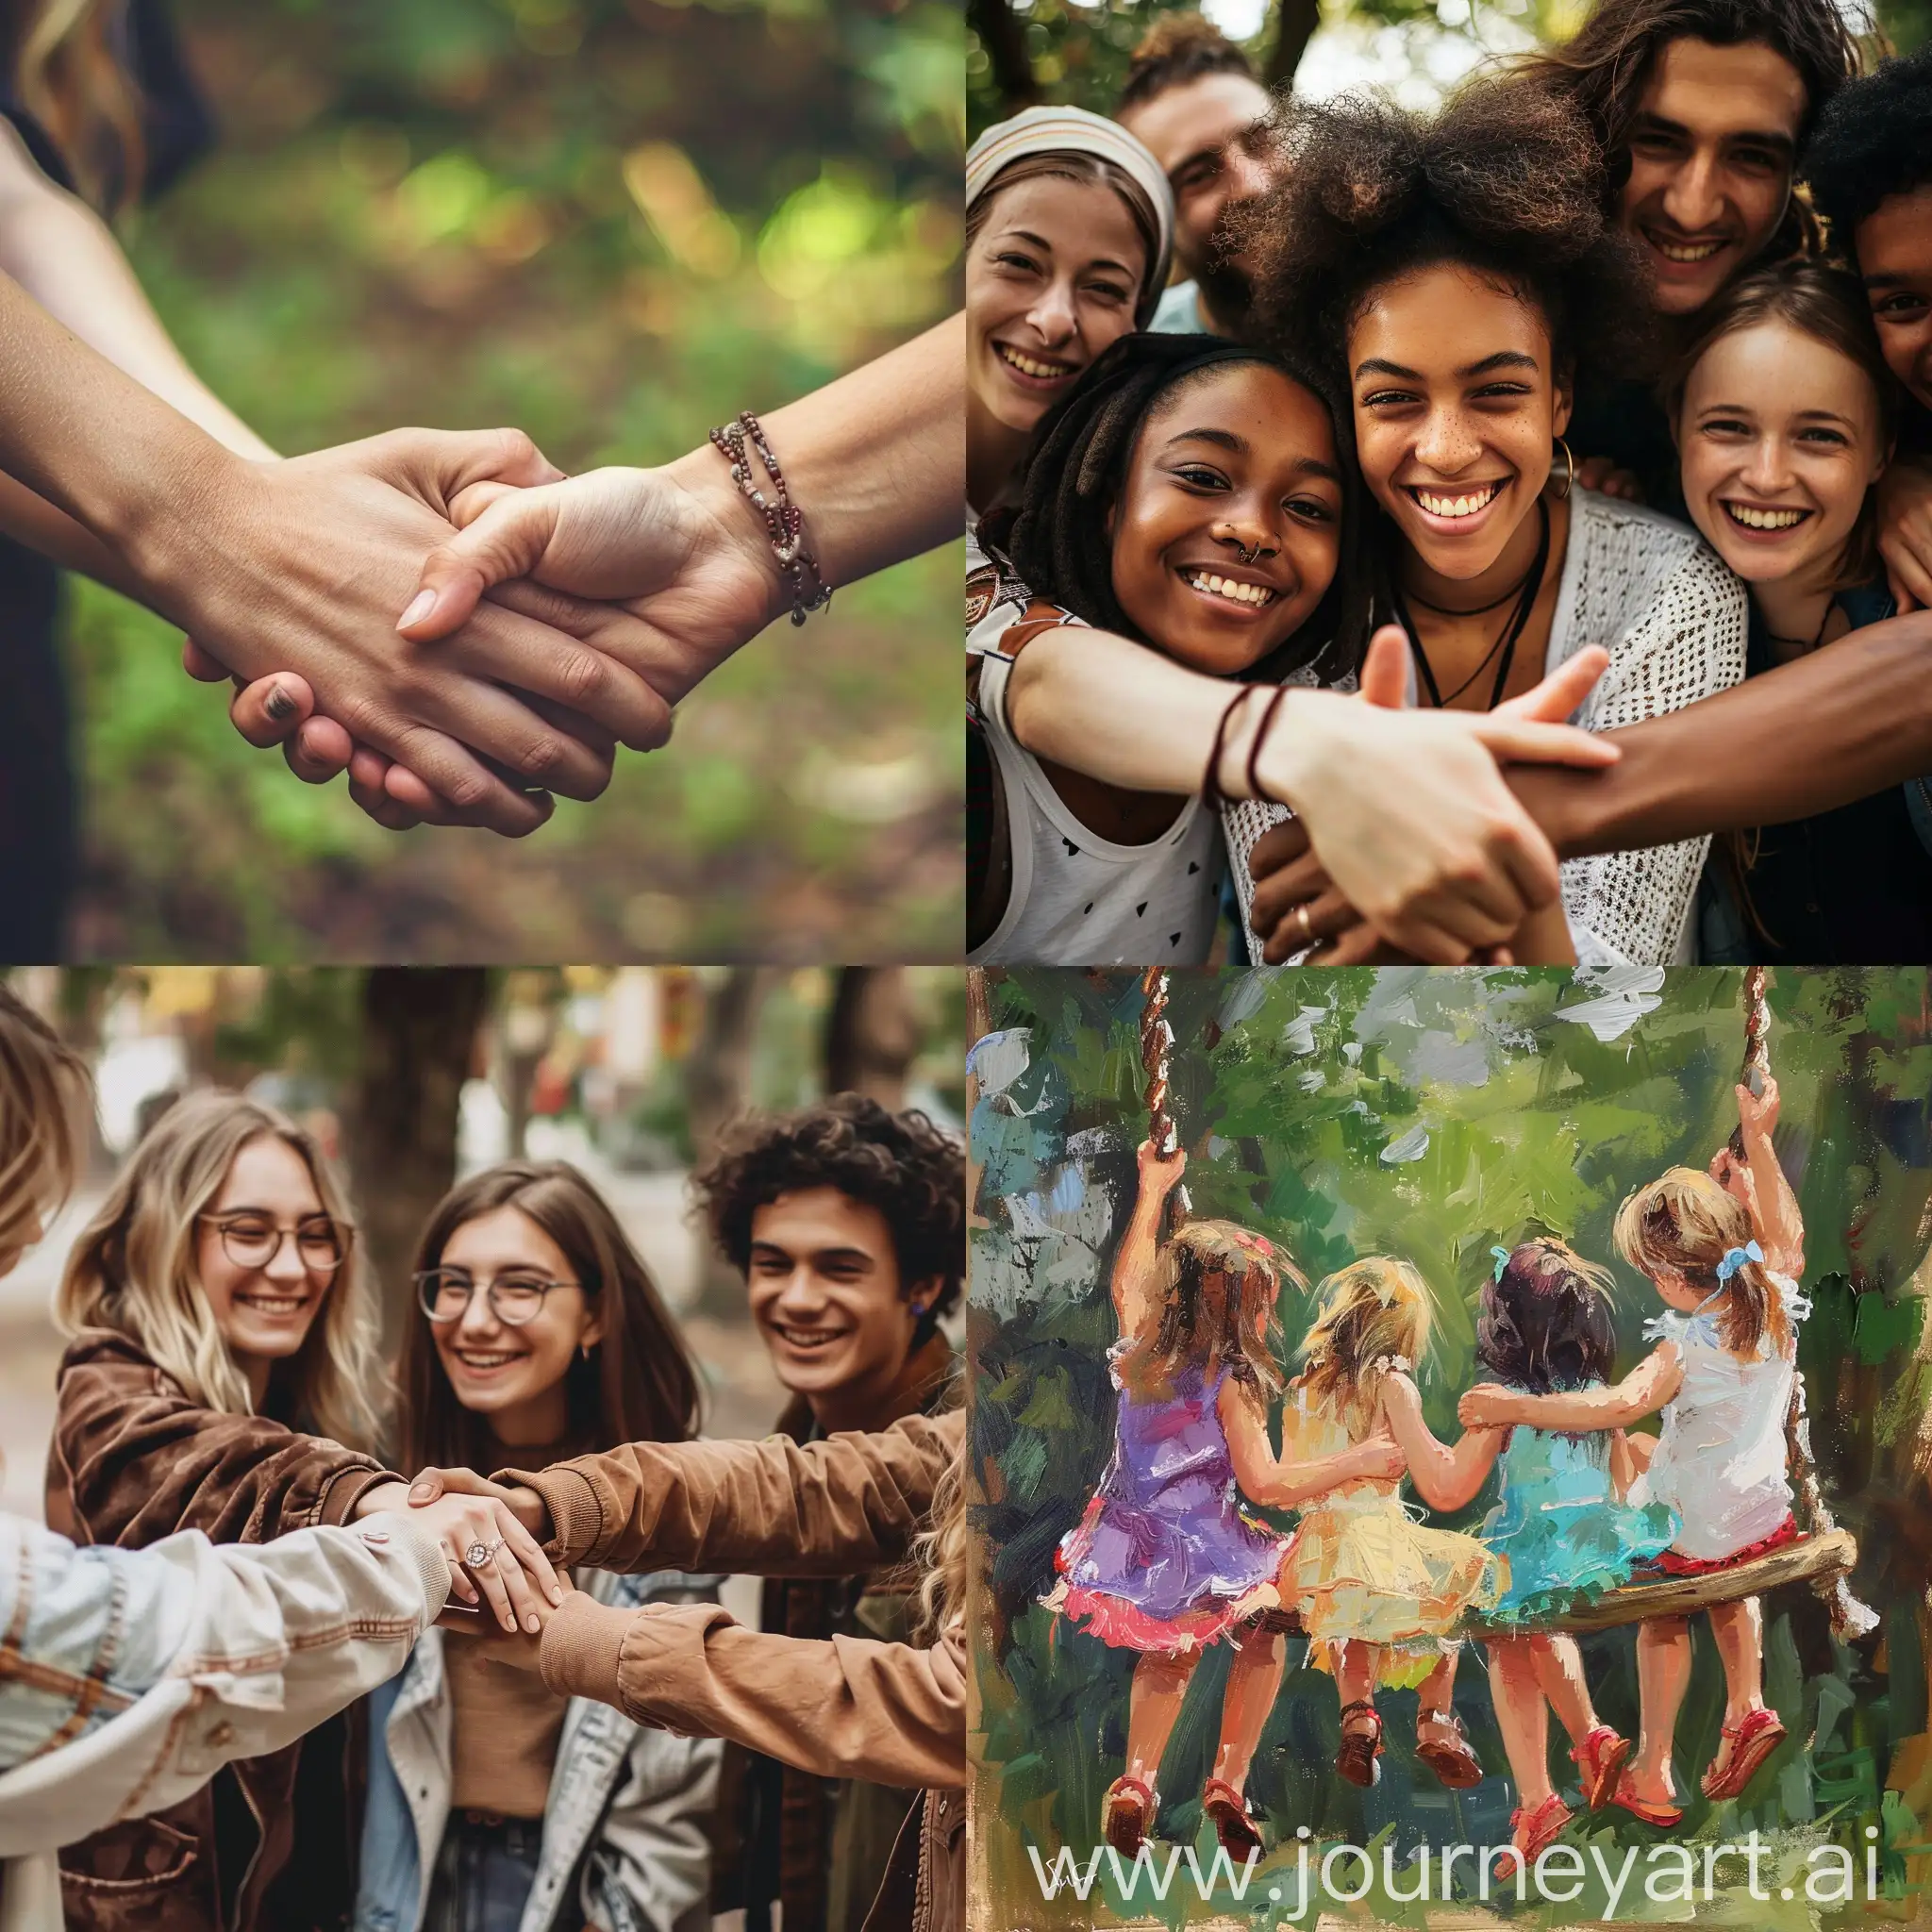 Foundation-of-True-Friendship-Vibrant-Connection